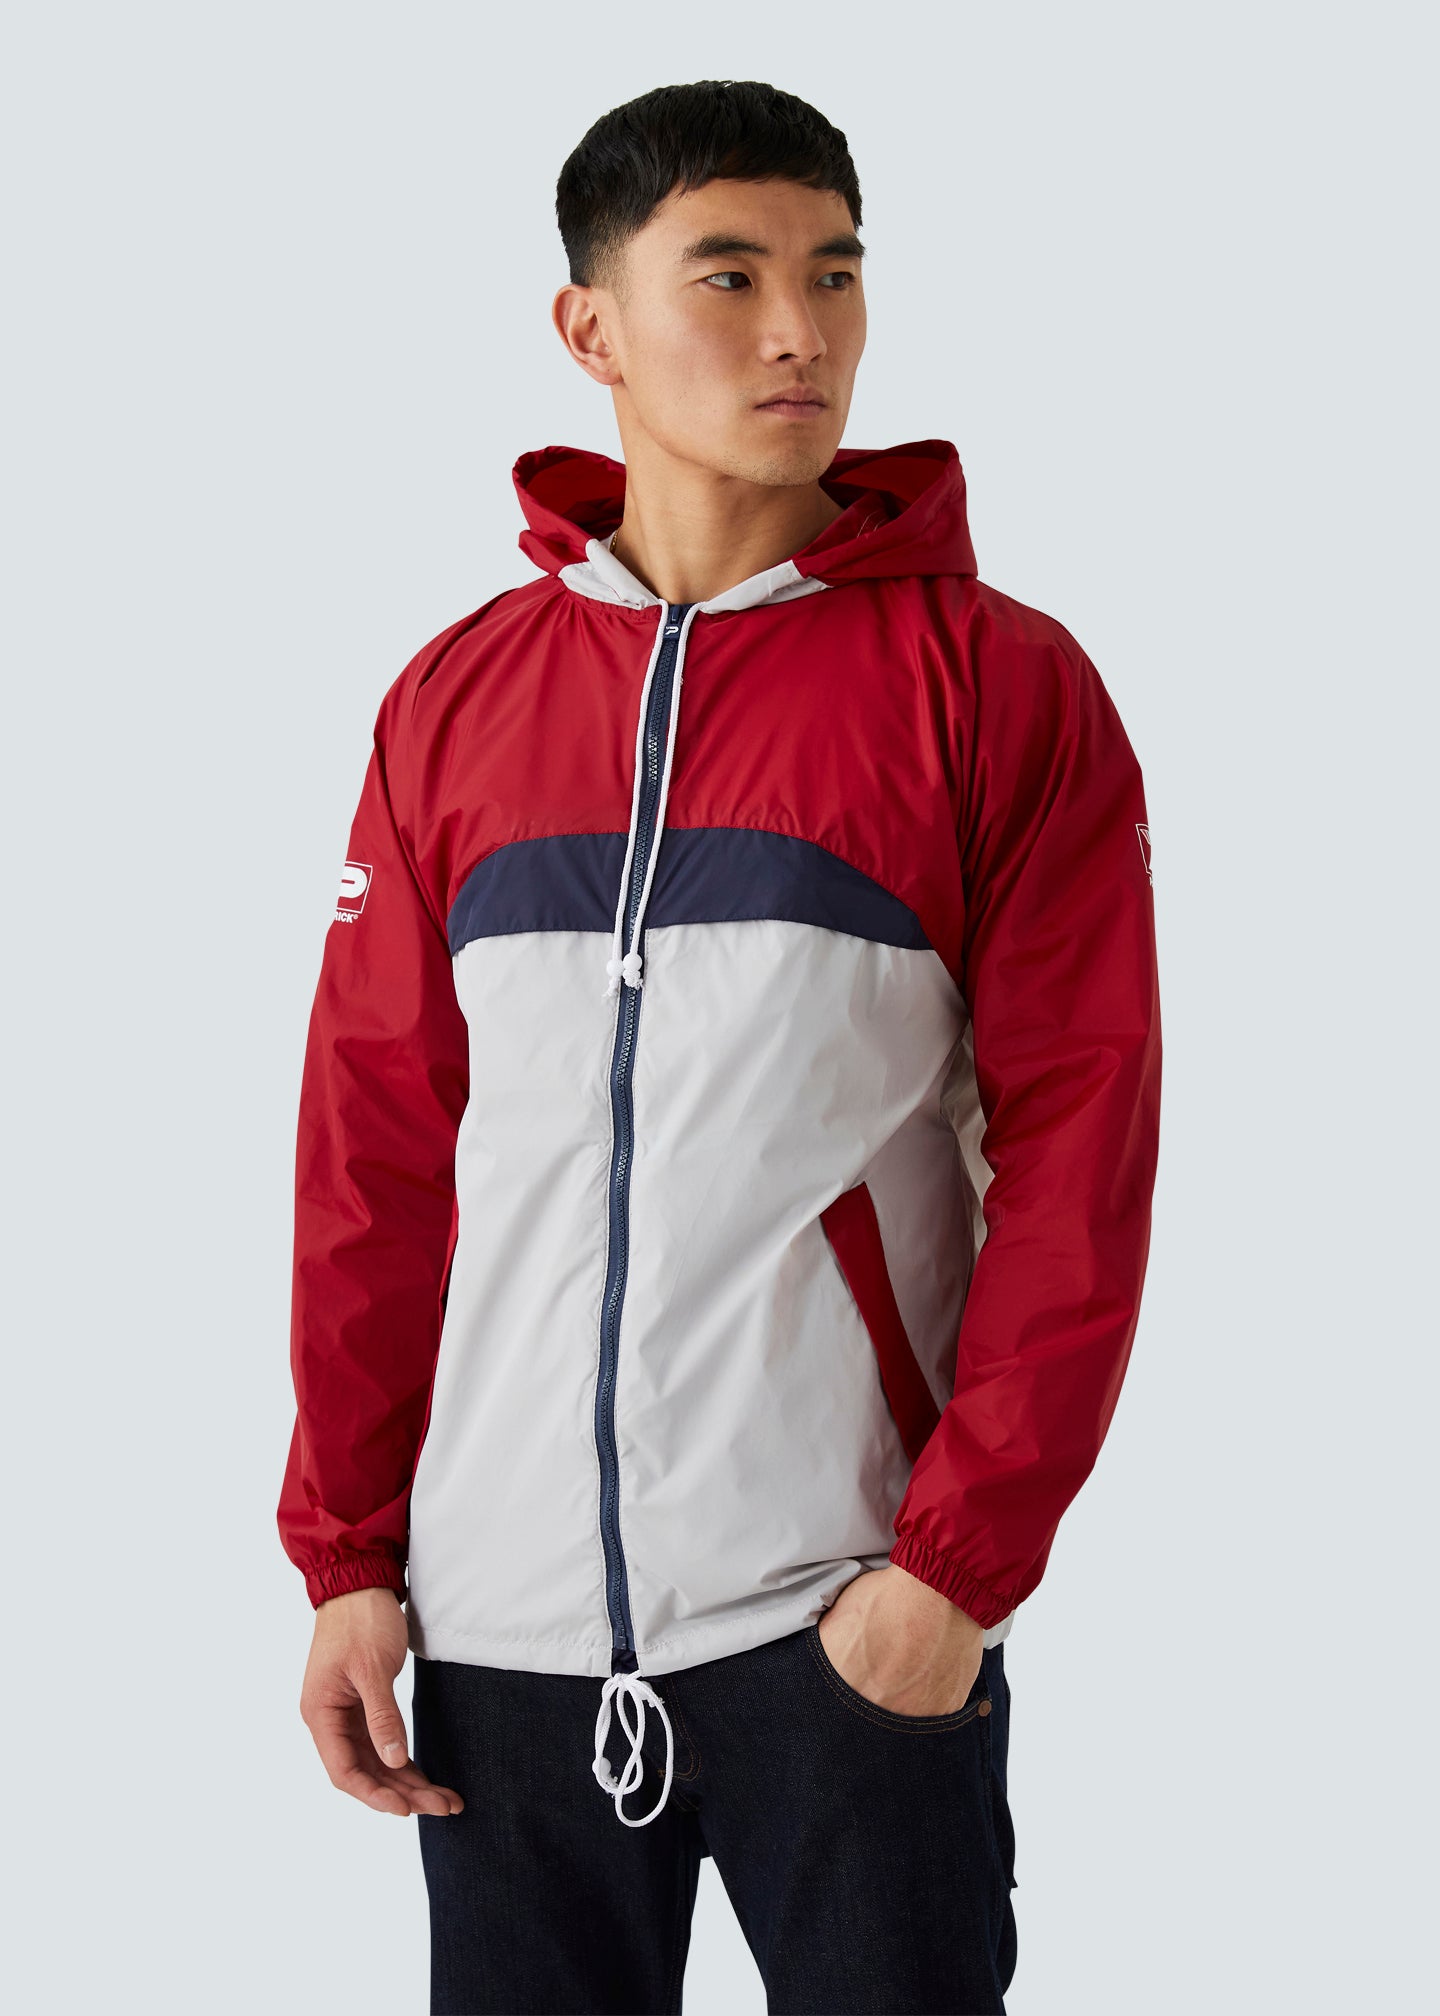 Patrick Classic Cagoule - Burgundy/Navy/Grey - Front